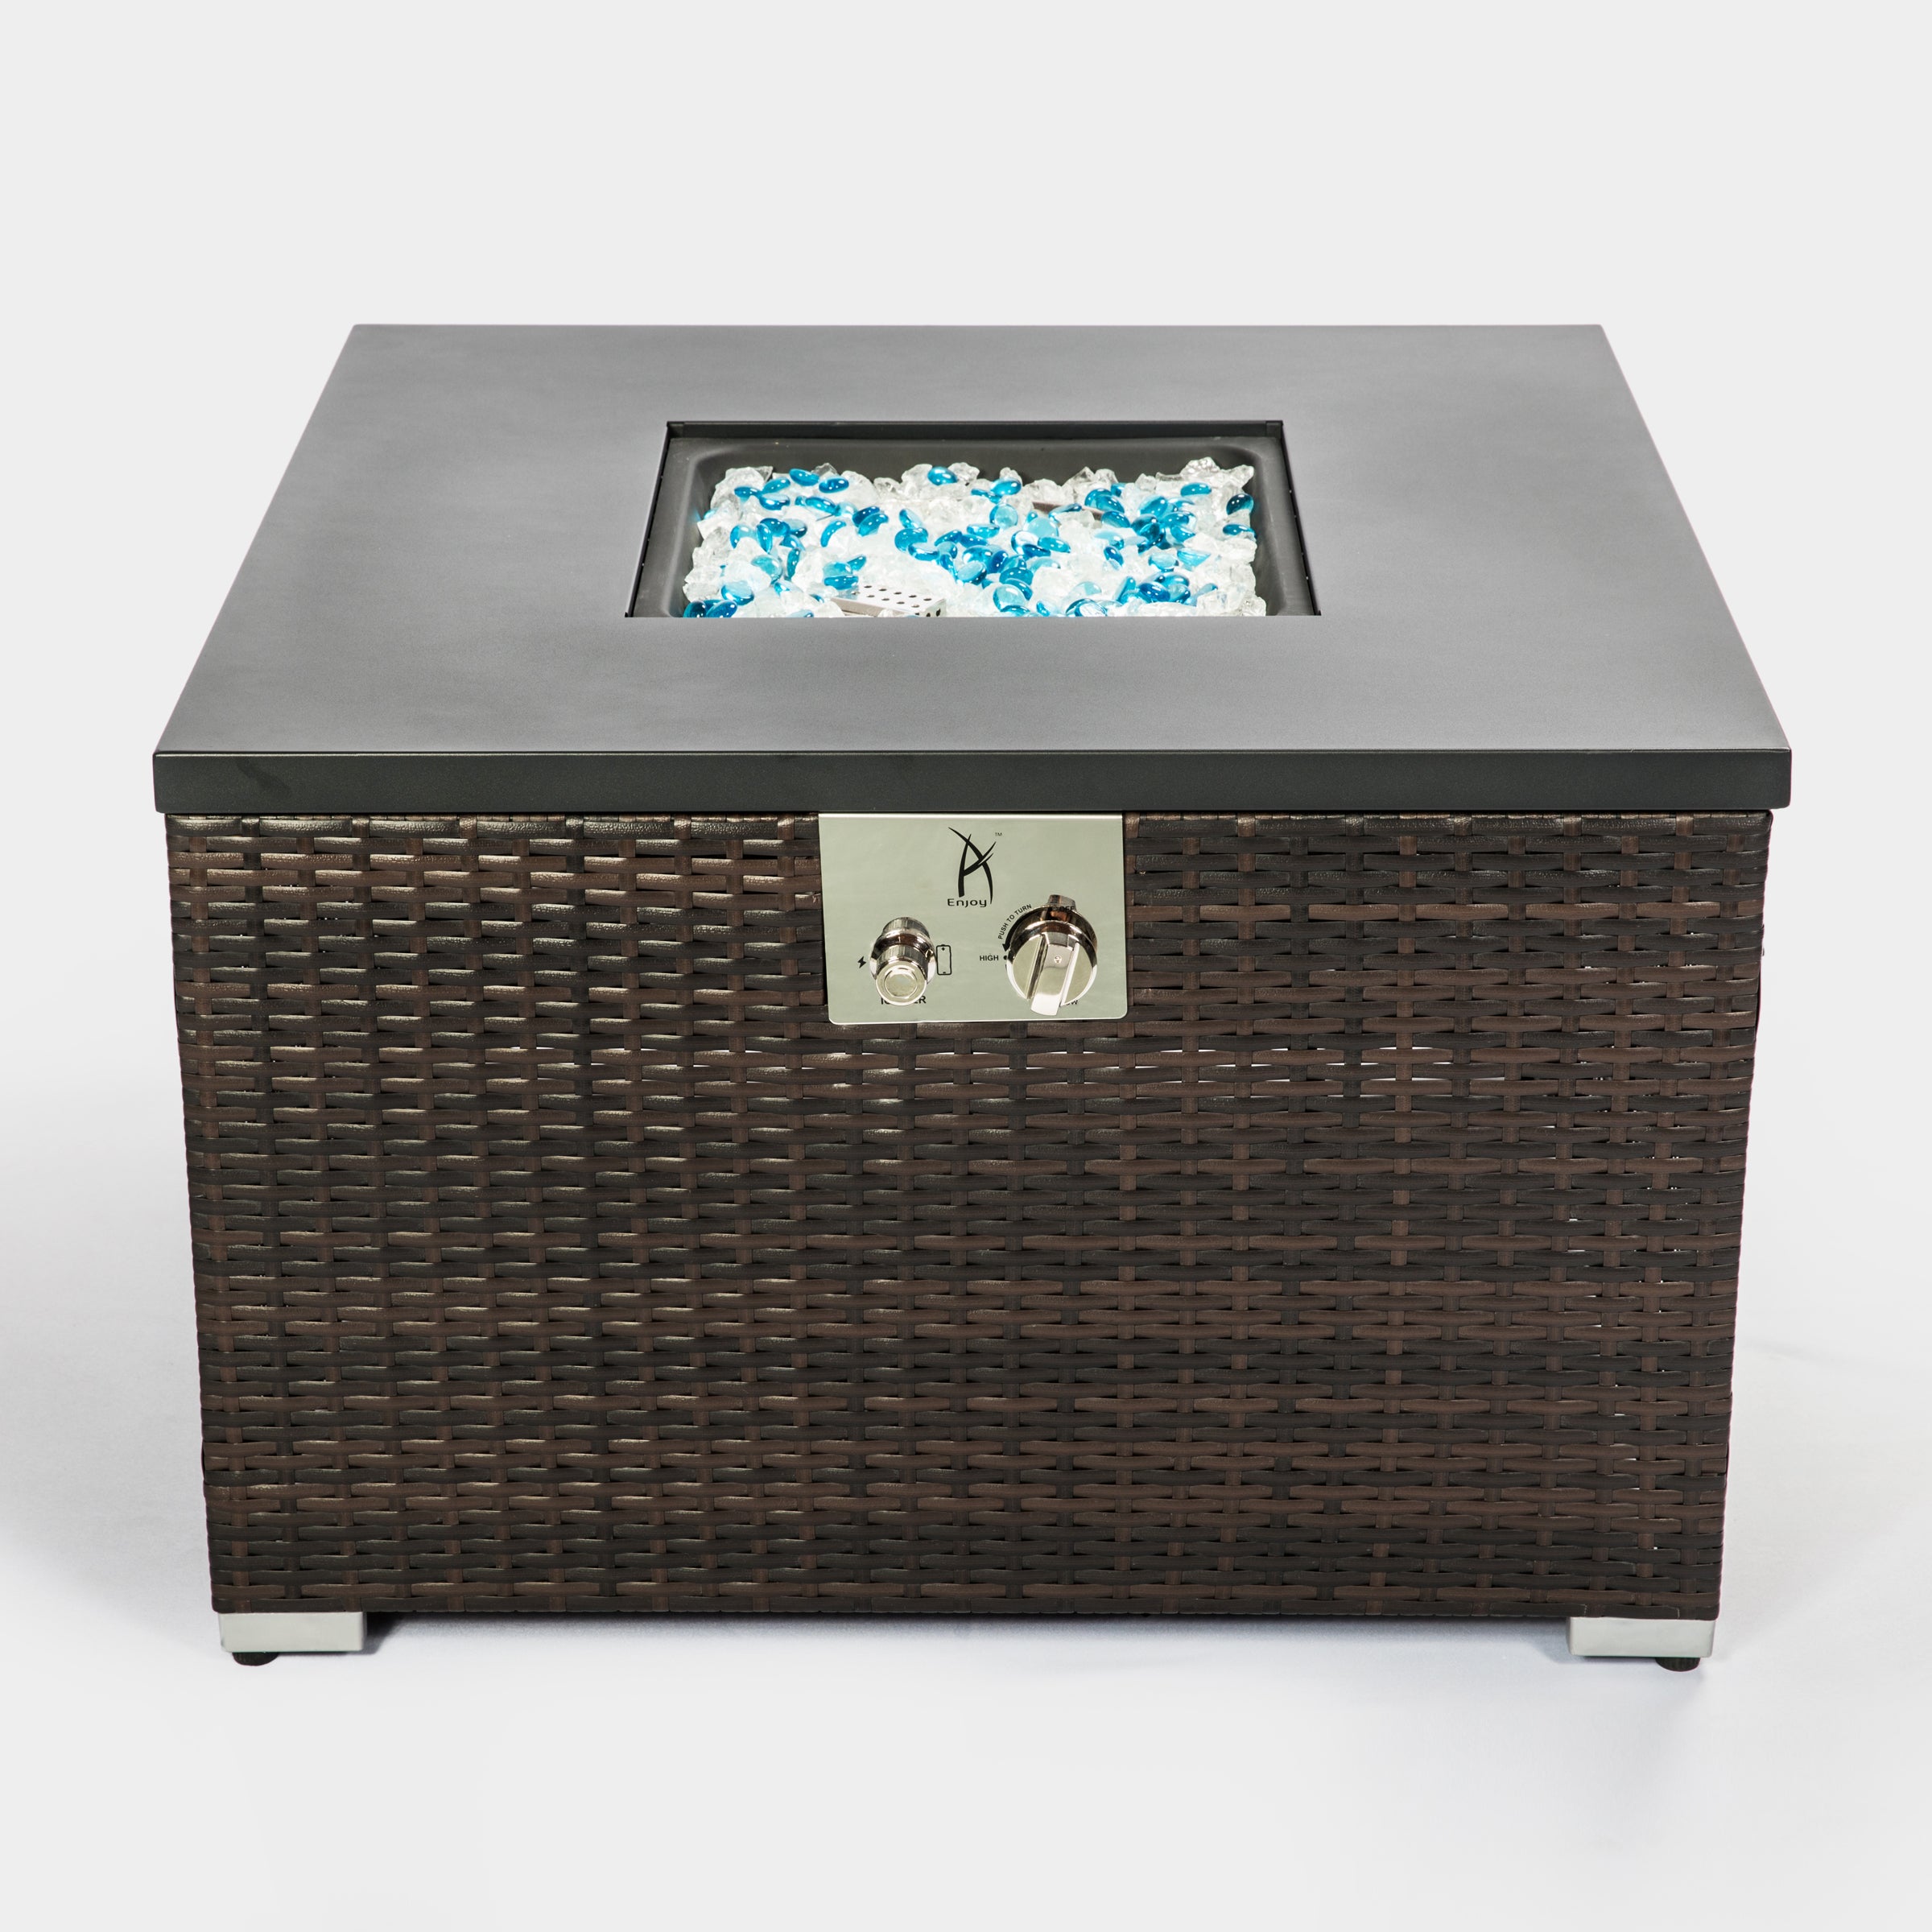 32inch Outdoor Propane Gas Fire Pit Table with Glass Rocks